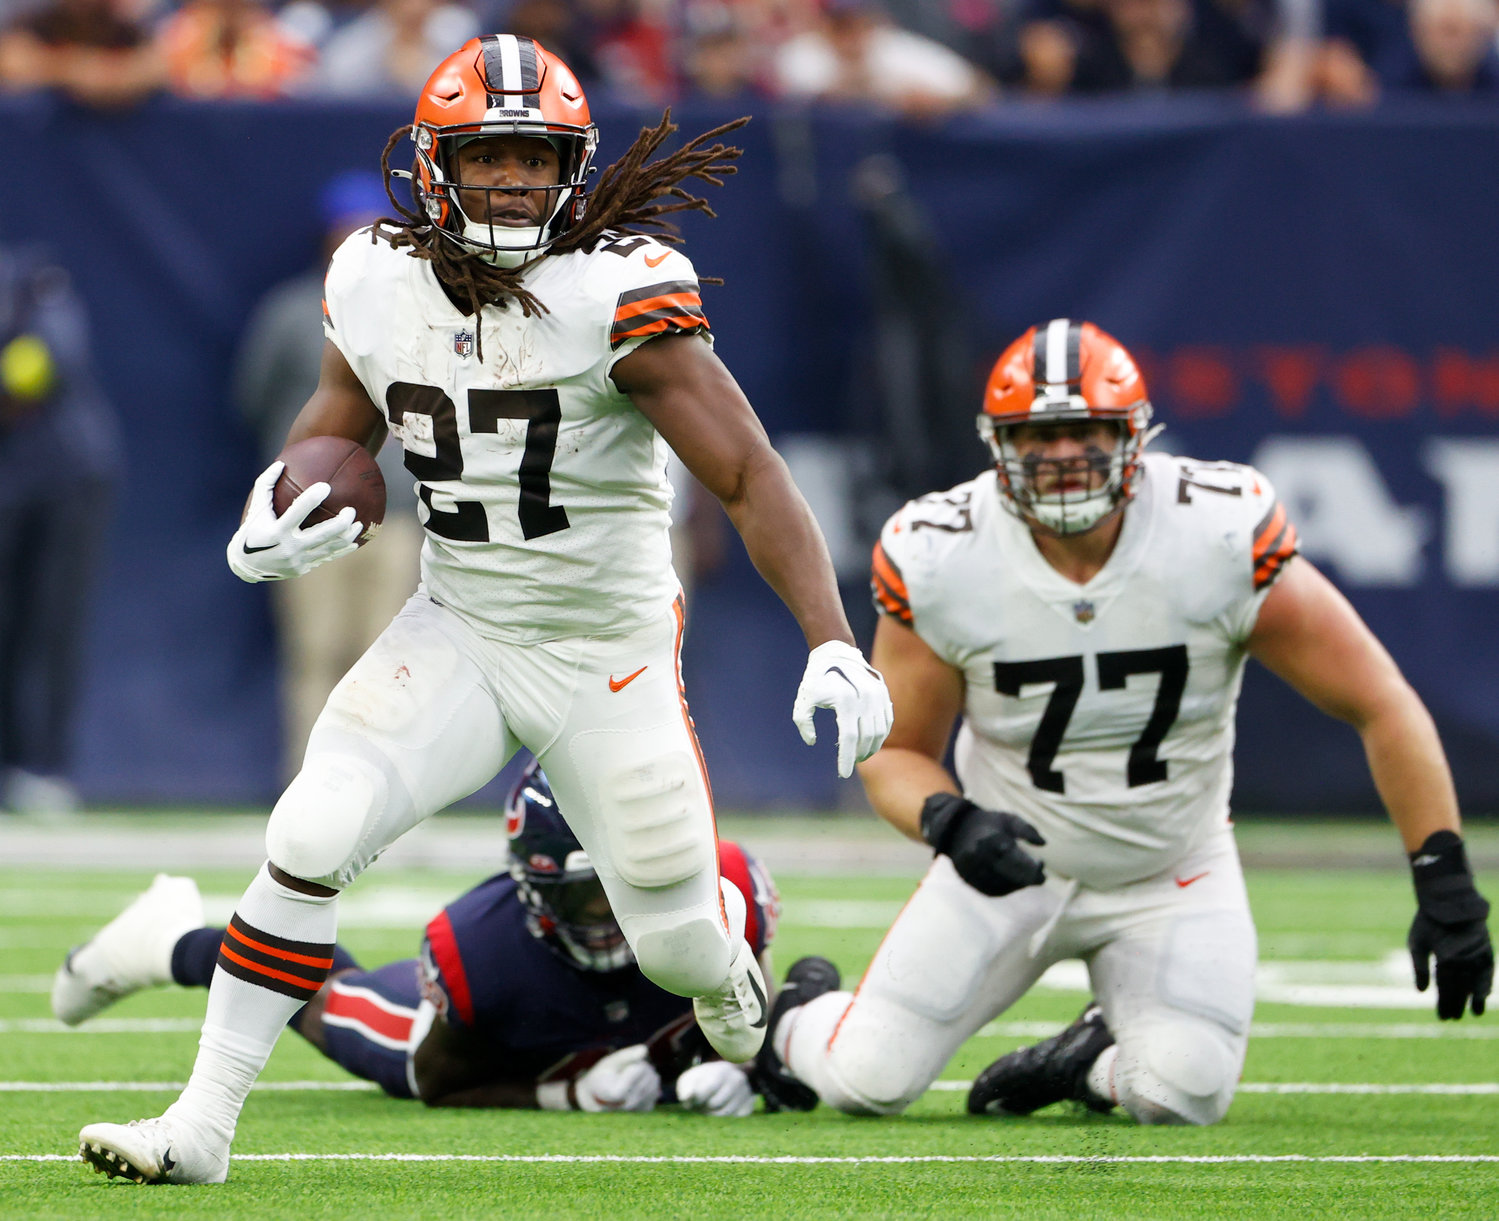 Cleveland Browns running back Kareem Hunt (27) carries the ball during an NFL game between the Houston Texans and the Cleveland Browns on Dec. 4, 2022, in Houston. The Browns won, 27-14.